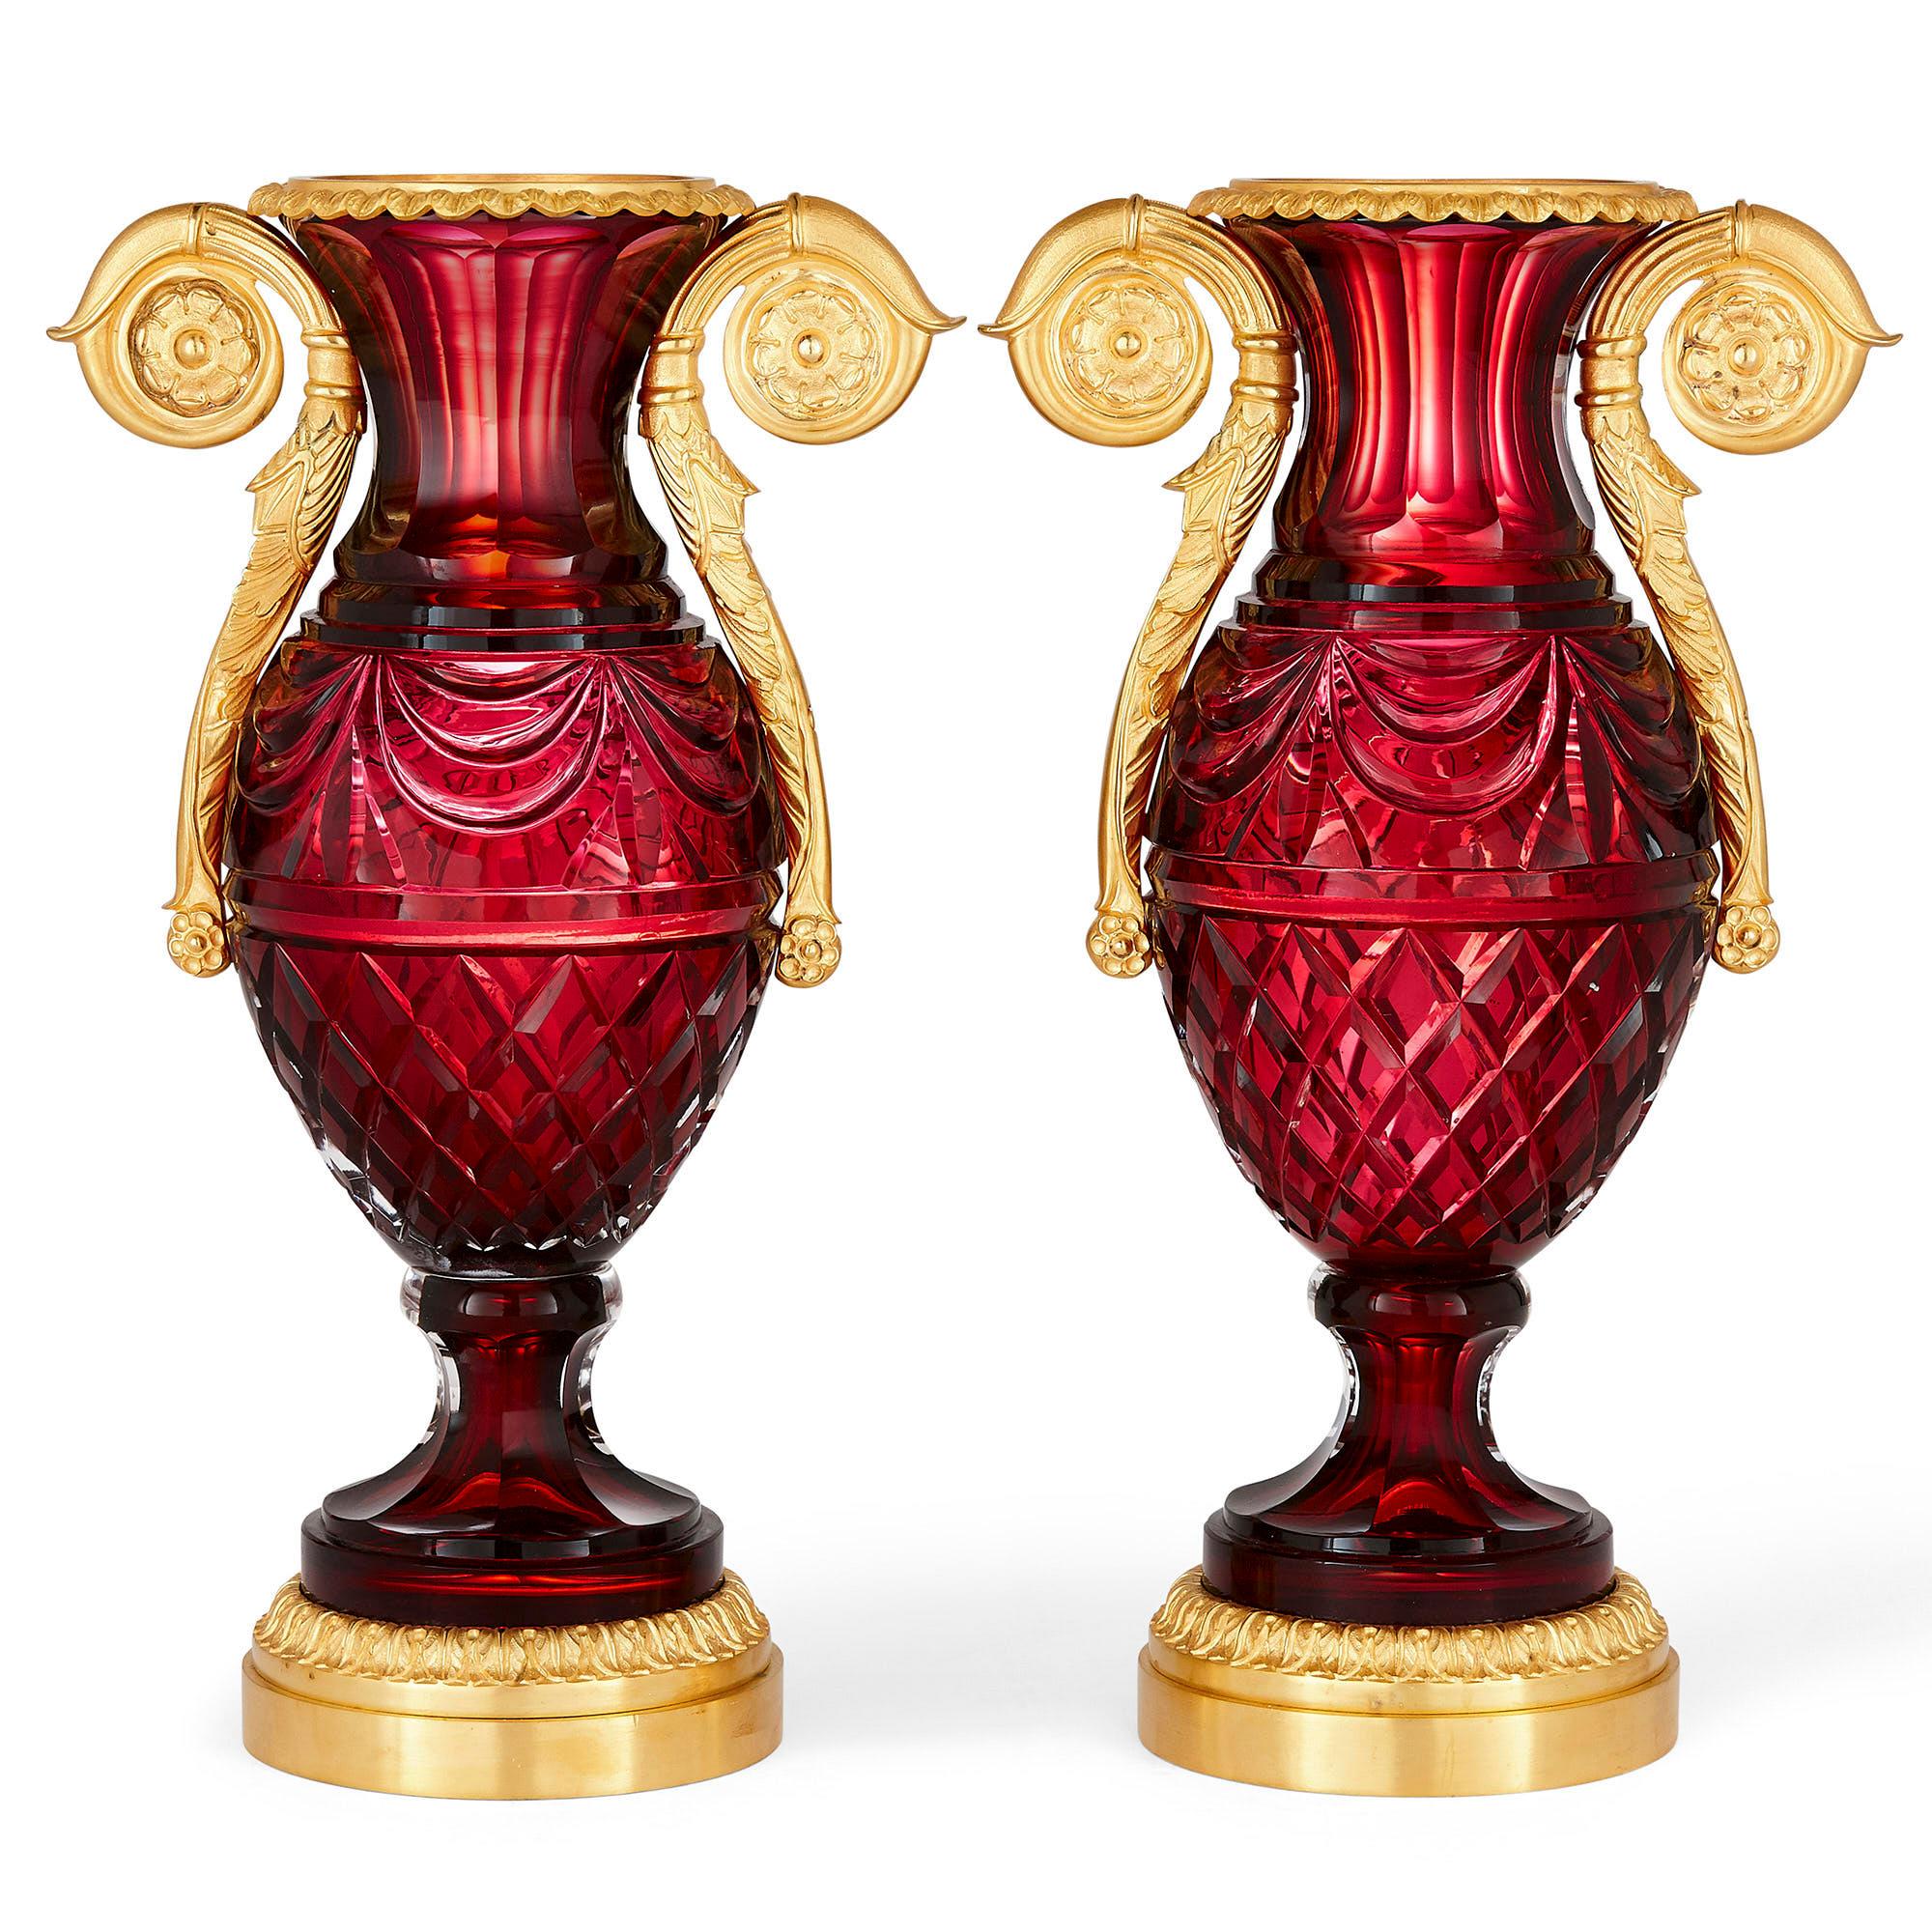 Pair of Russian neoclassical style cut glass and gilt bronze vases
Russian, 20th century
Measures: Height 38cm, width 22cm, depth 14cm

Each vase has an ovoid ruby coloured cut glass body and a flared neck. They are mounted with twin gilt bronze